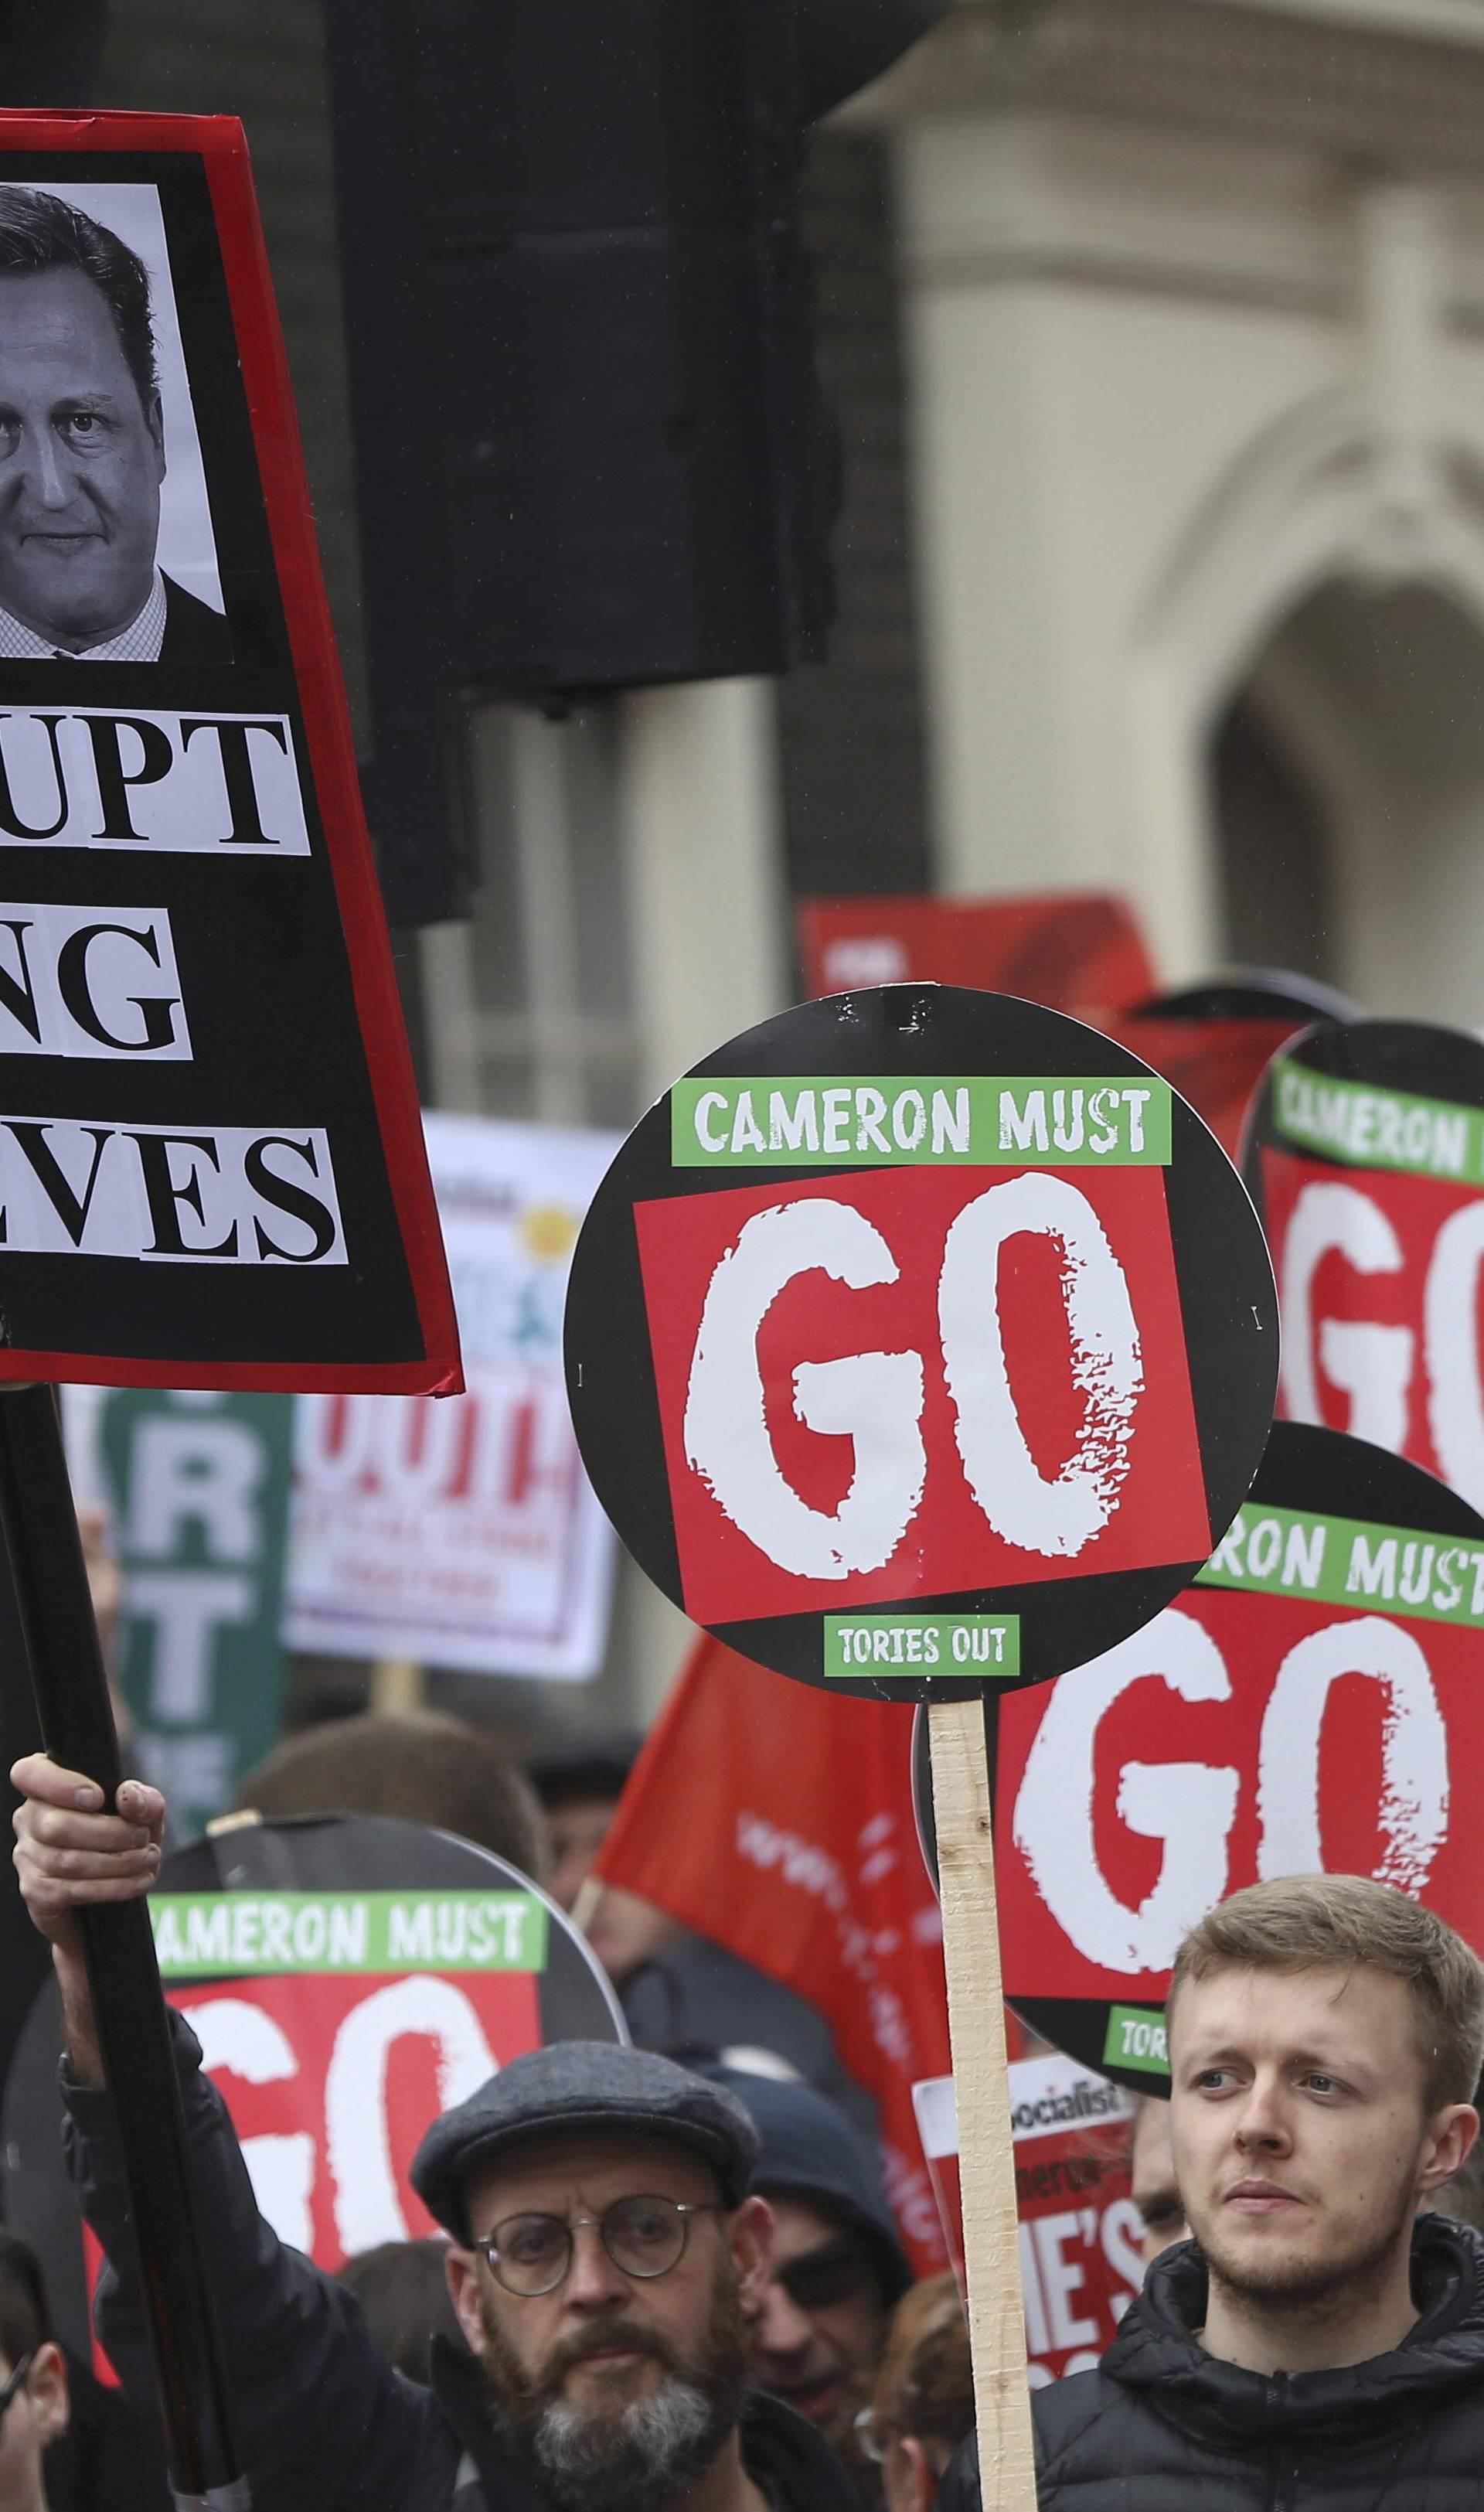 Demonstrators hold placards during an anti-austerity protest in London